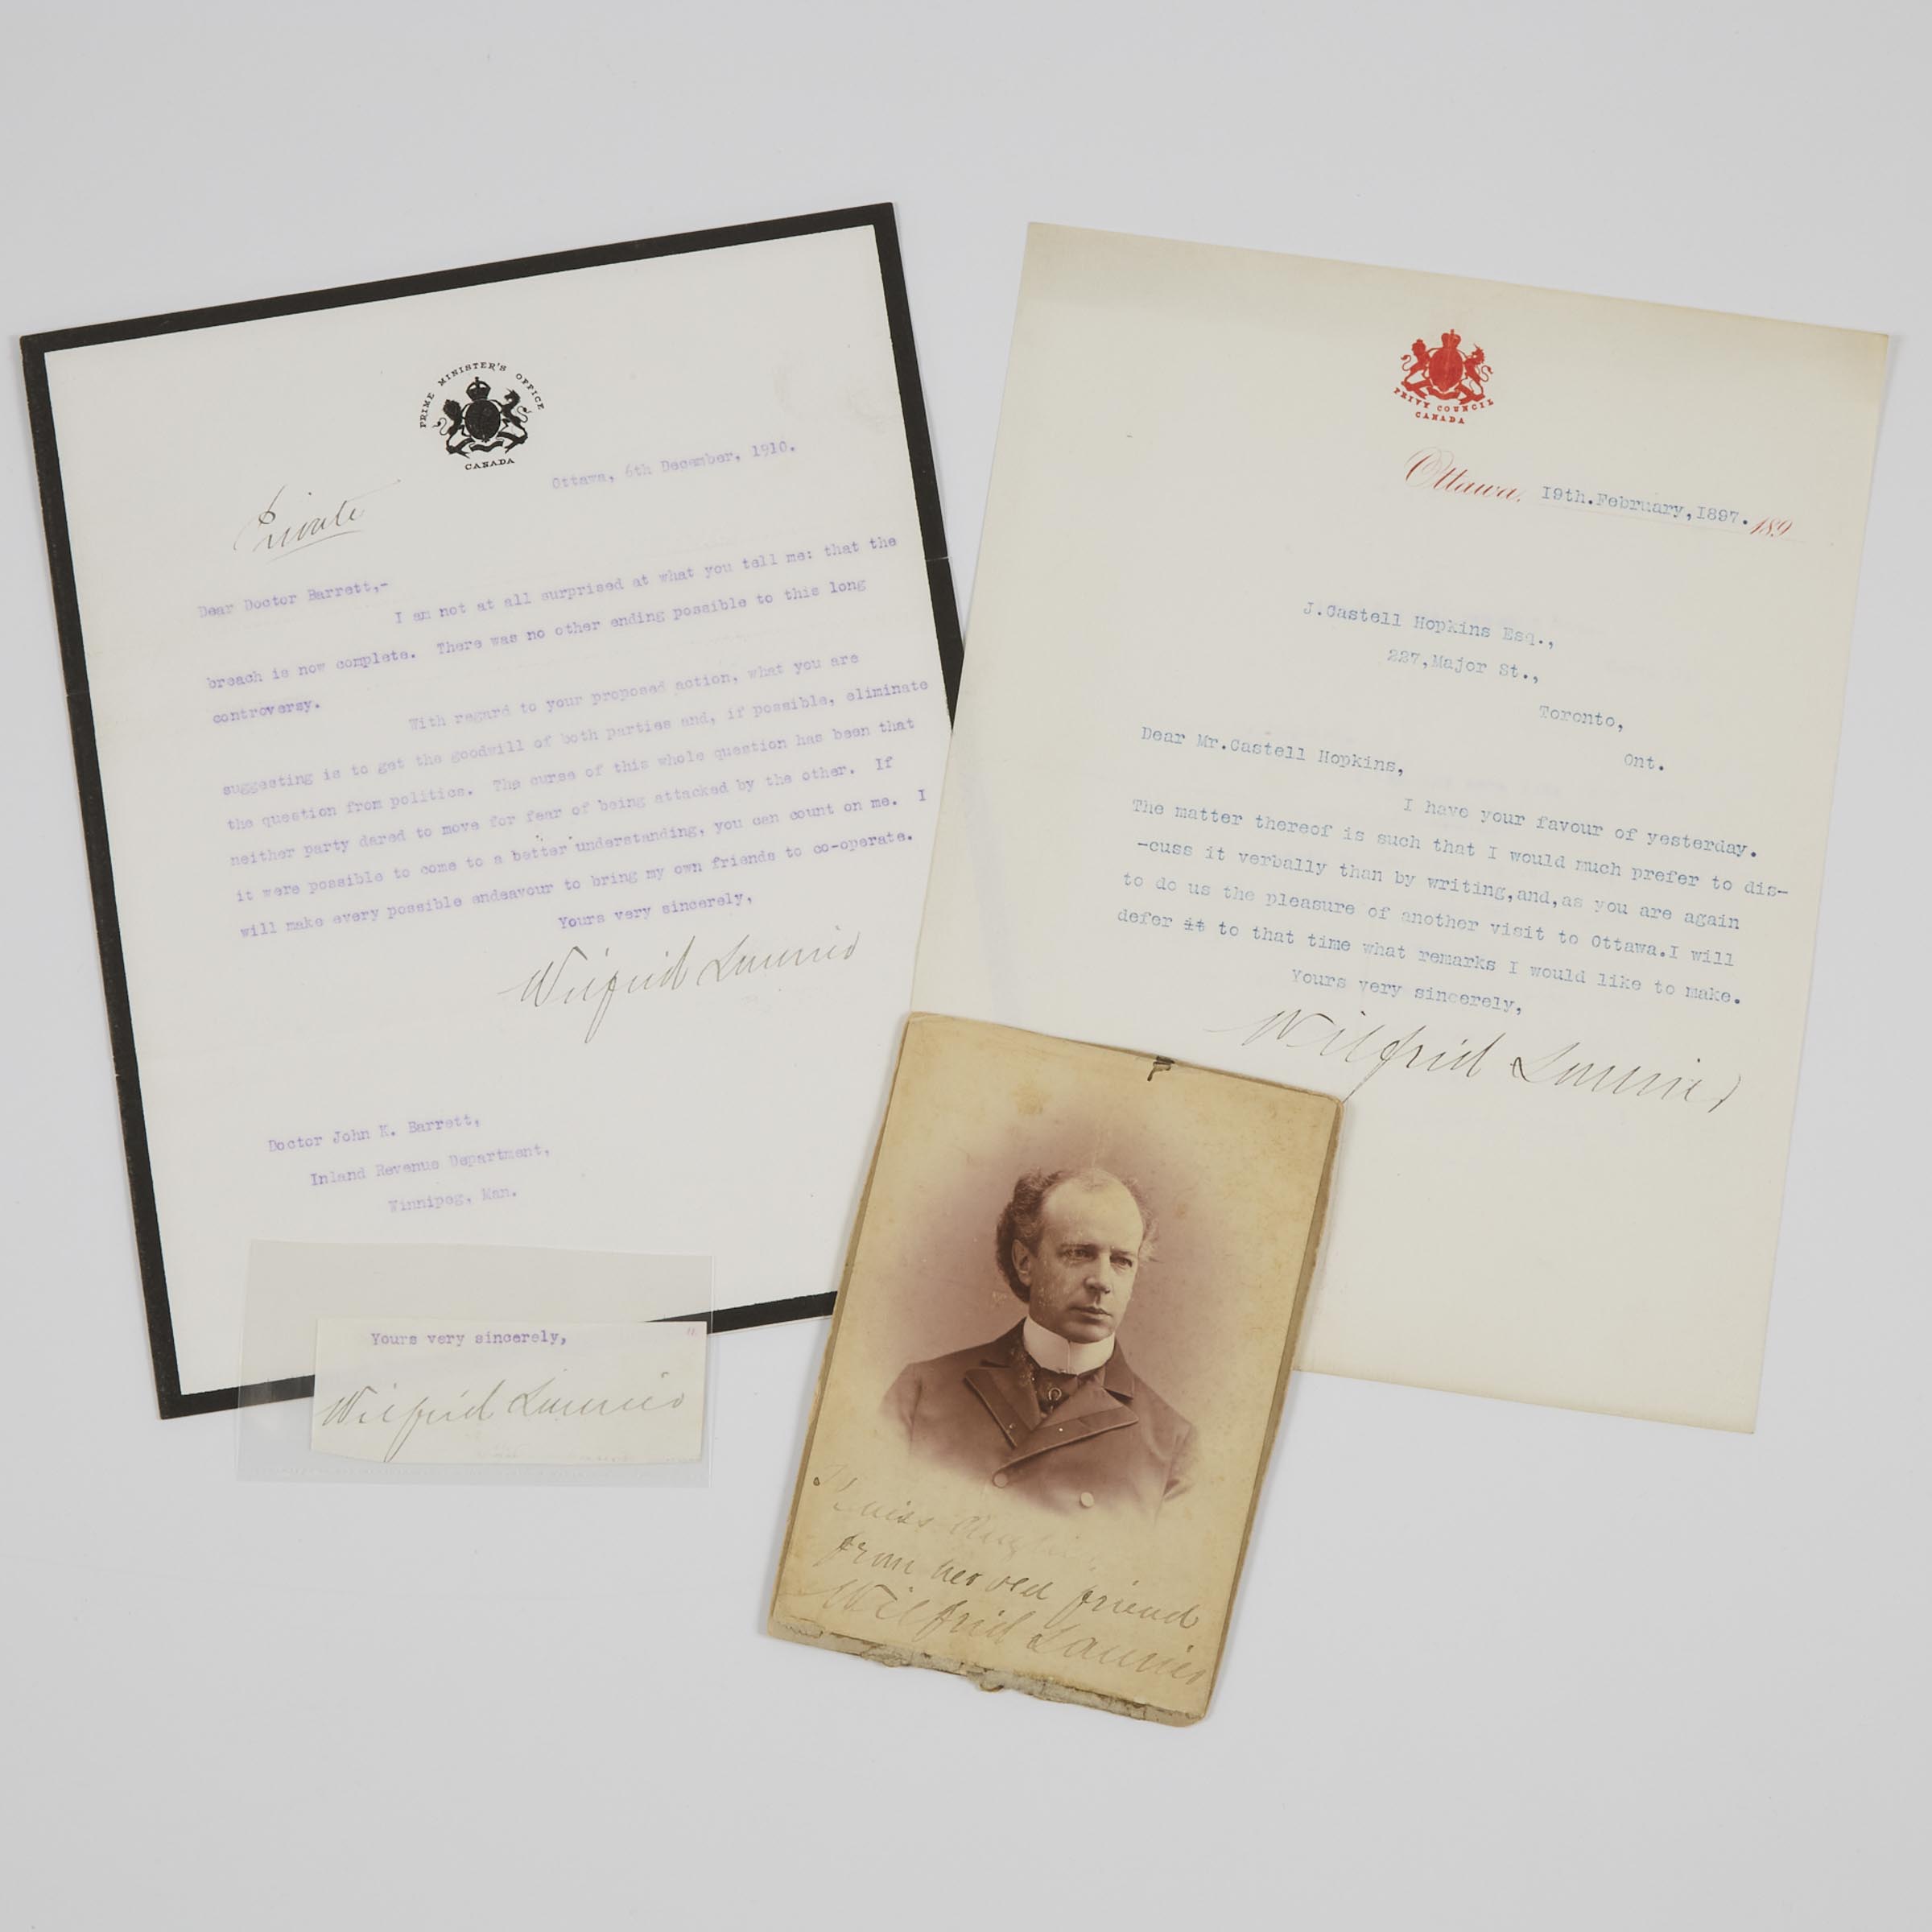 Sir Wilfrid Laurier, Two Signed Letters, a Cabinet Card and an Autograph, 1890-1916